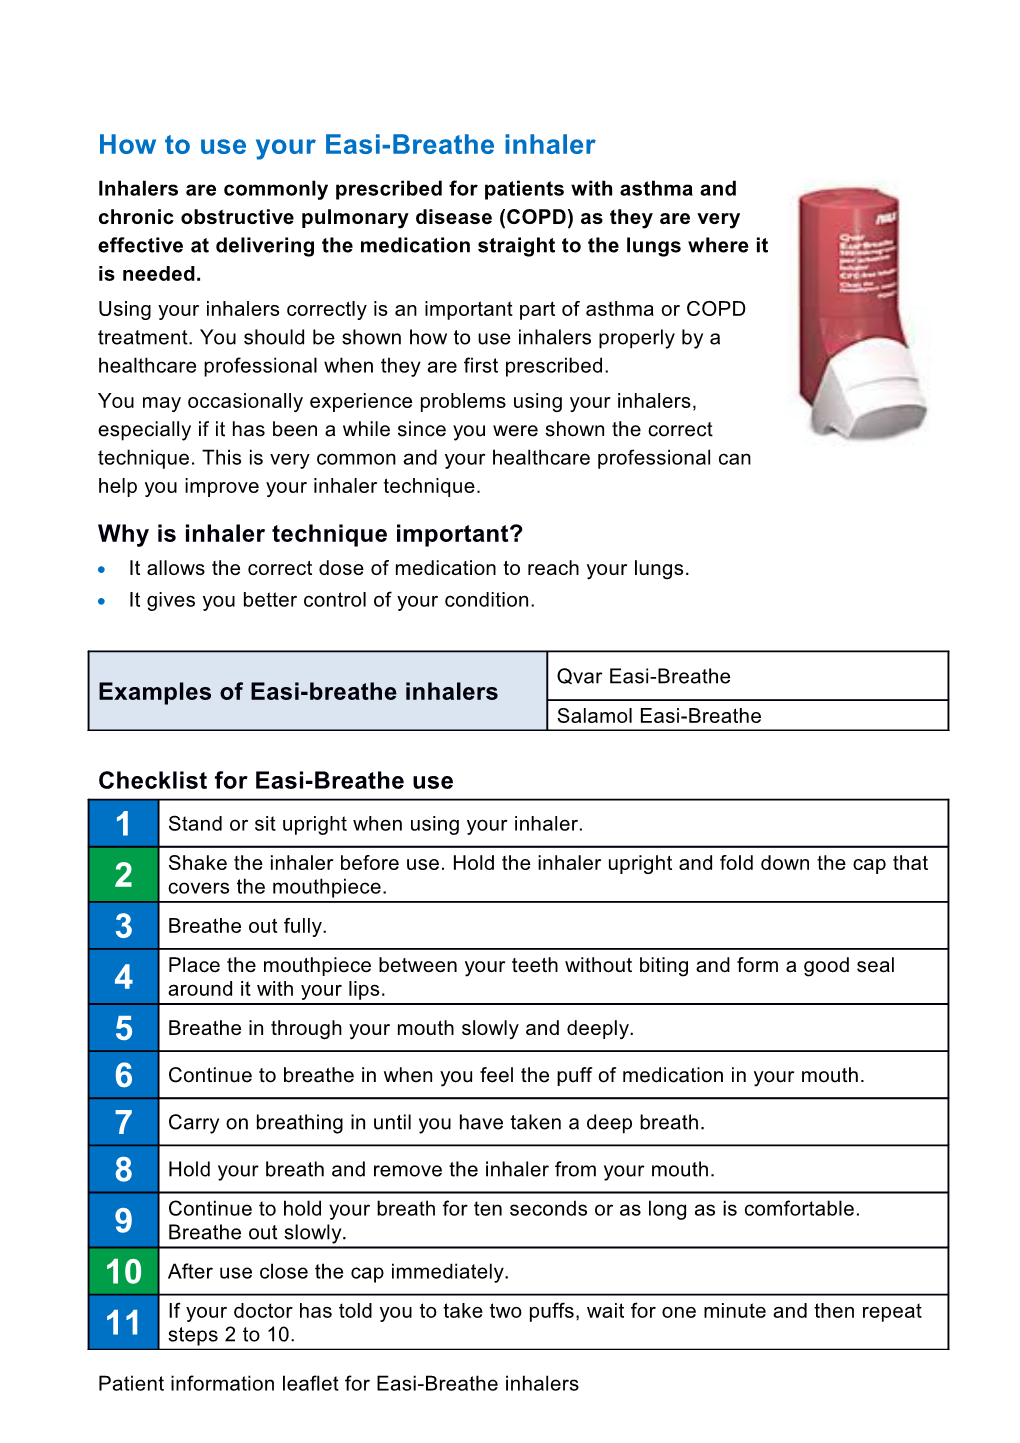 How to Use Your Easi-Breathe Inhaler